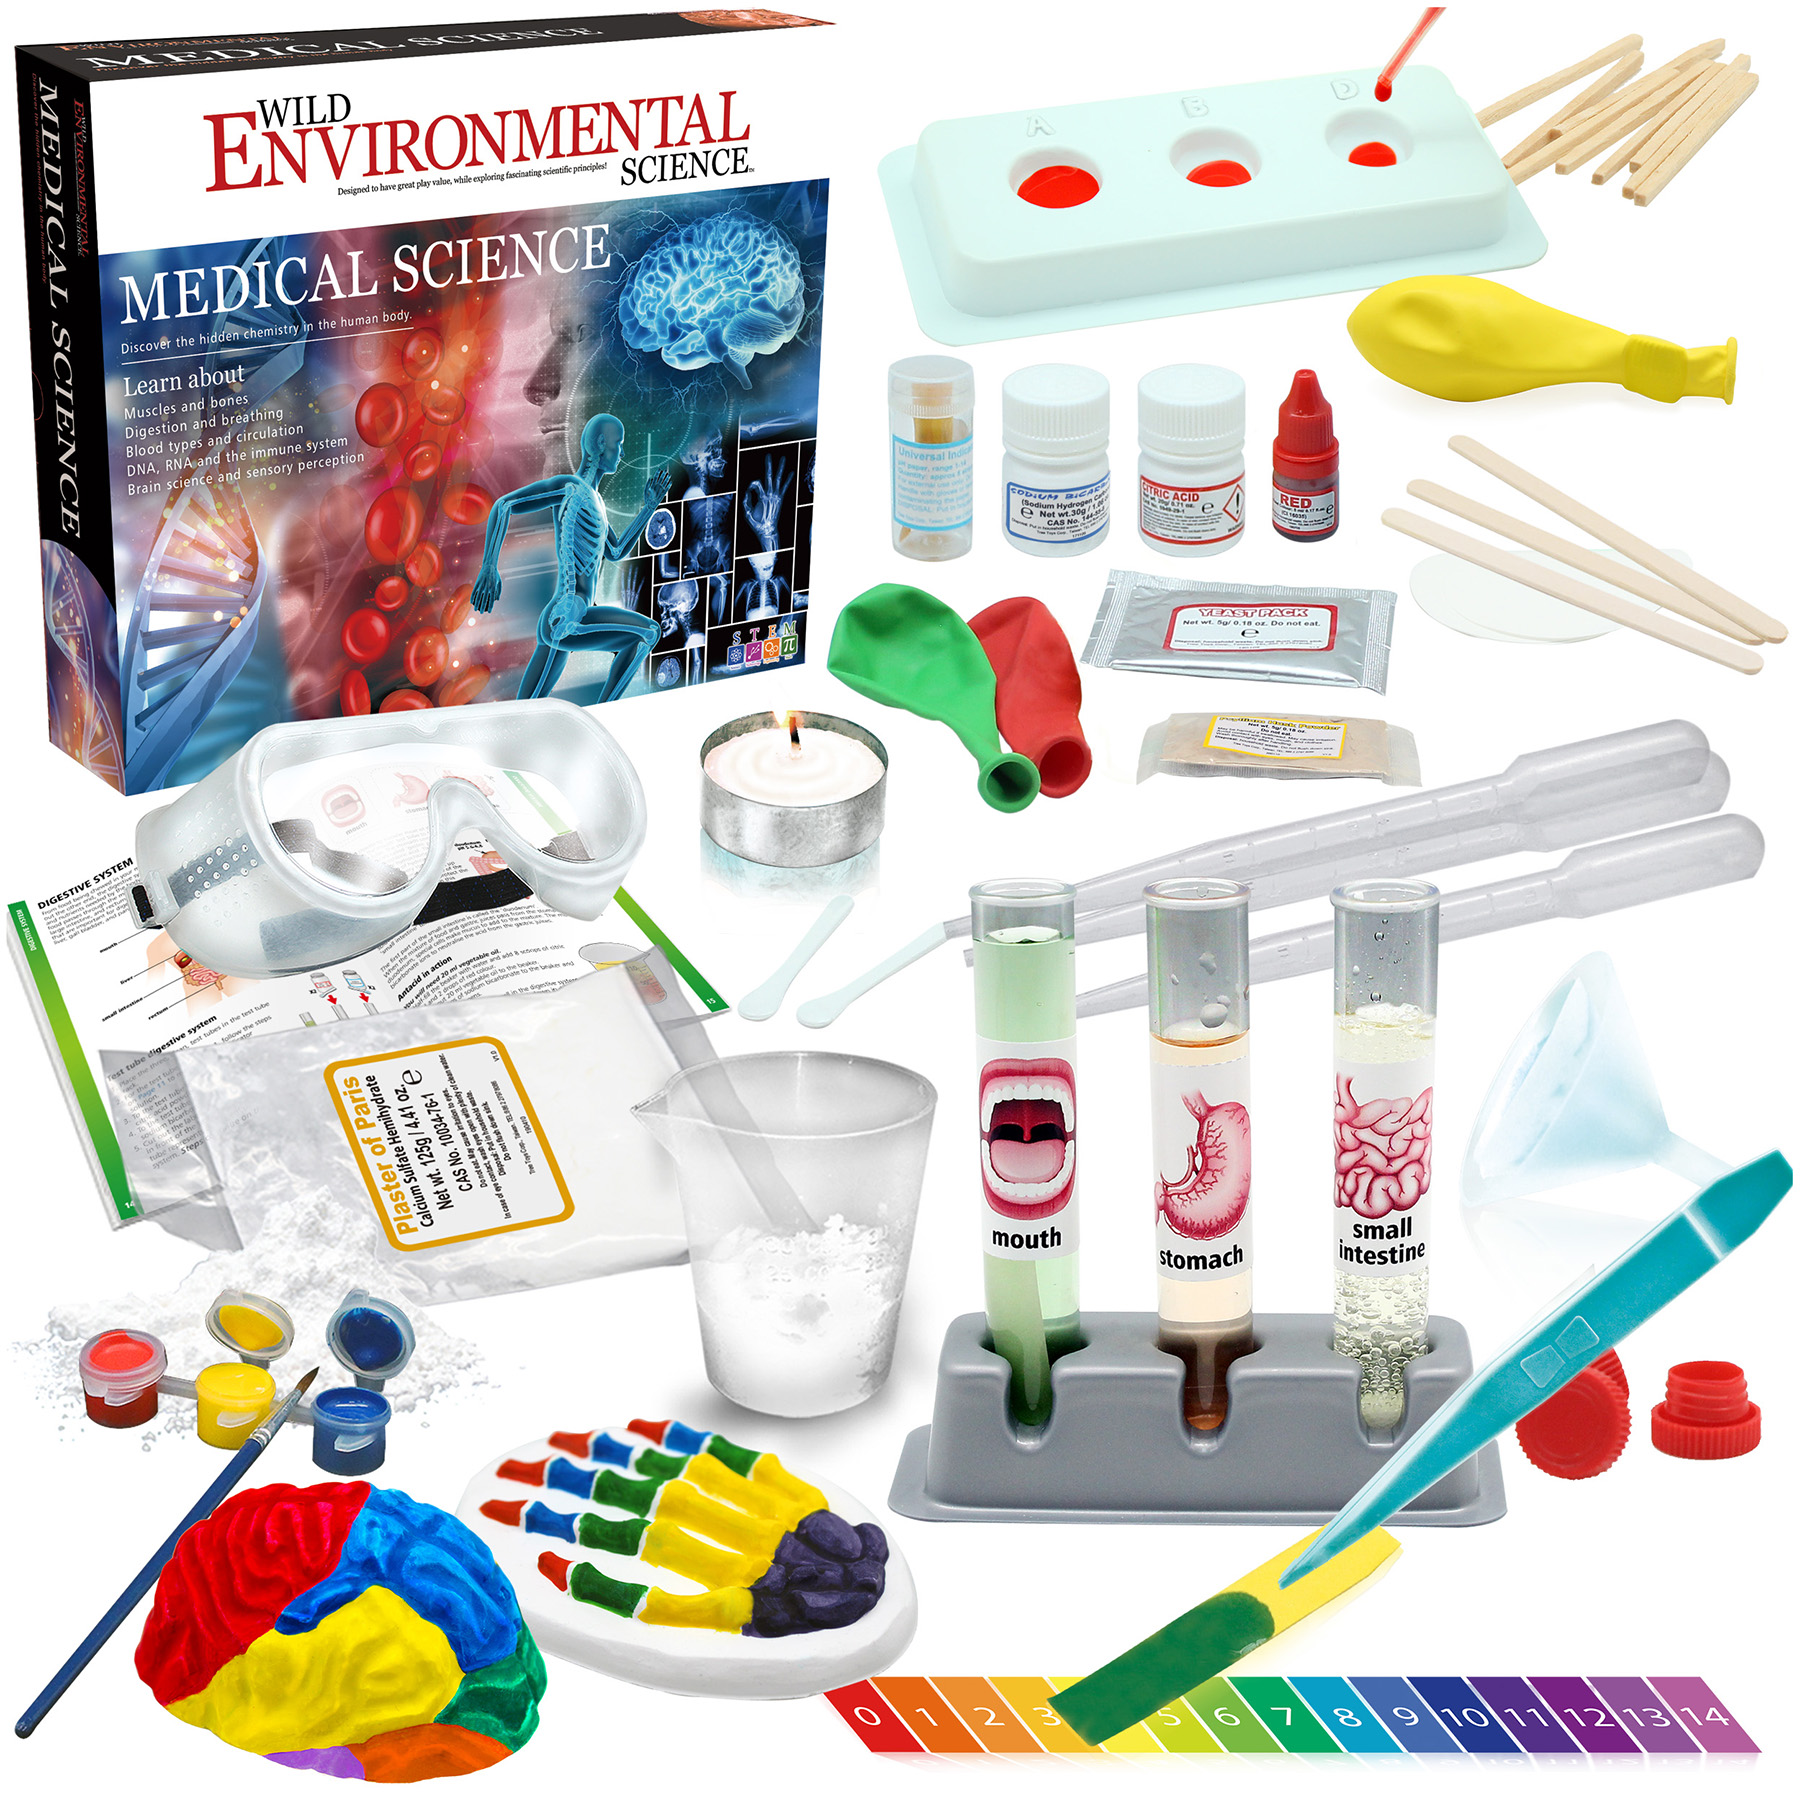 WILD ENVIRONMENTAL SCIENCE Medical Science - STEM Kit for Ages 8+ - Make a Test-Tube Digestive System, Extract DNA, Create Anatomical Models and More! image number null